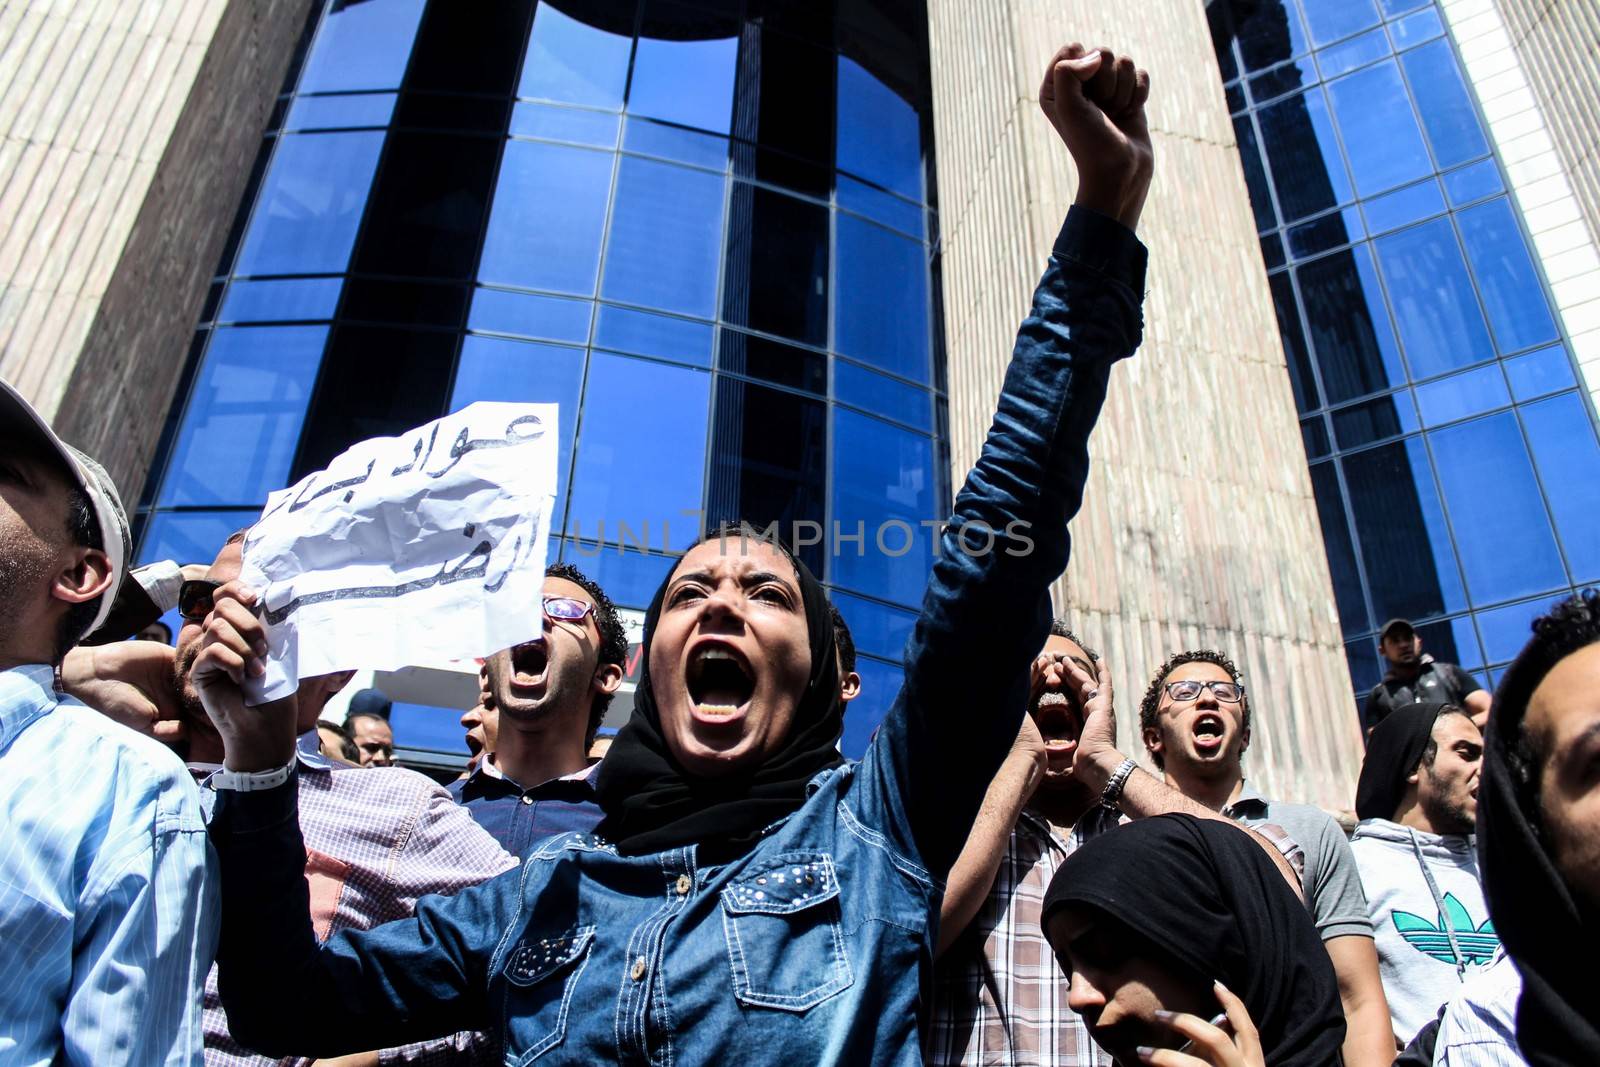 EGYPT, Cairo: Protesters cry out as thousands rally in front of the Syndicate of Journalists in Cairo on April 15, 2016 during a demonstration against the decision to hand over control of two strategic Red Sea islands, Tiran and Sanafir, to Saudi Arabia.